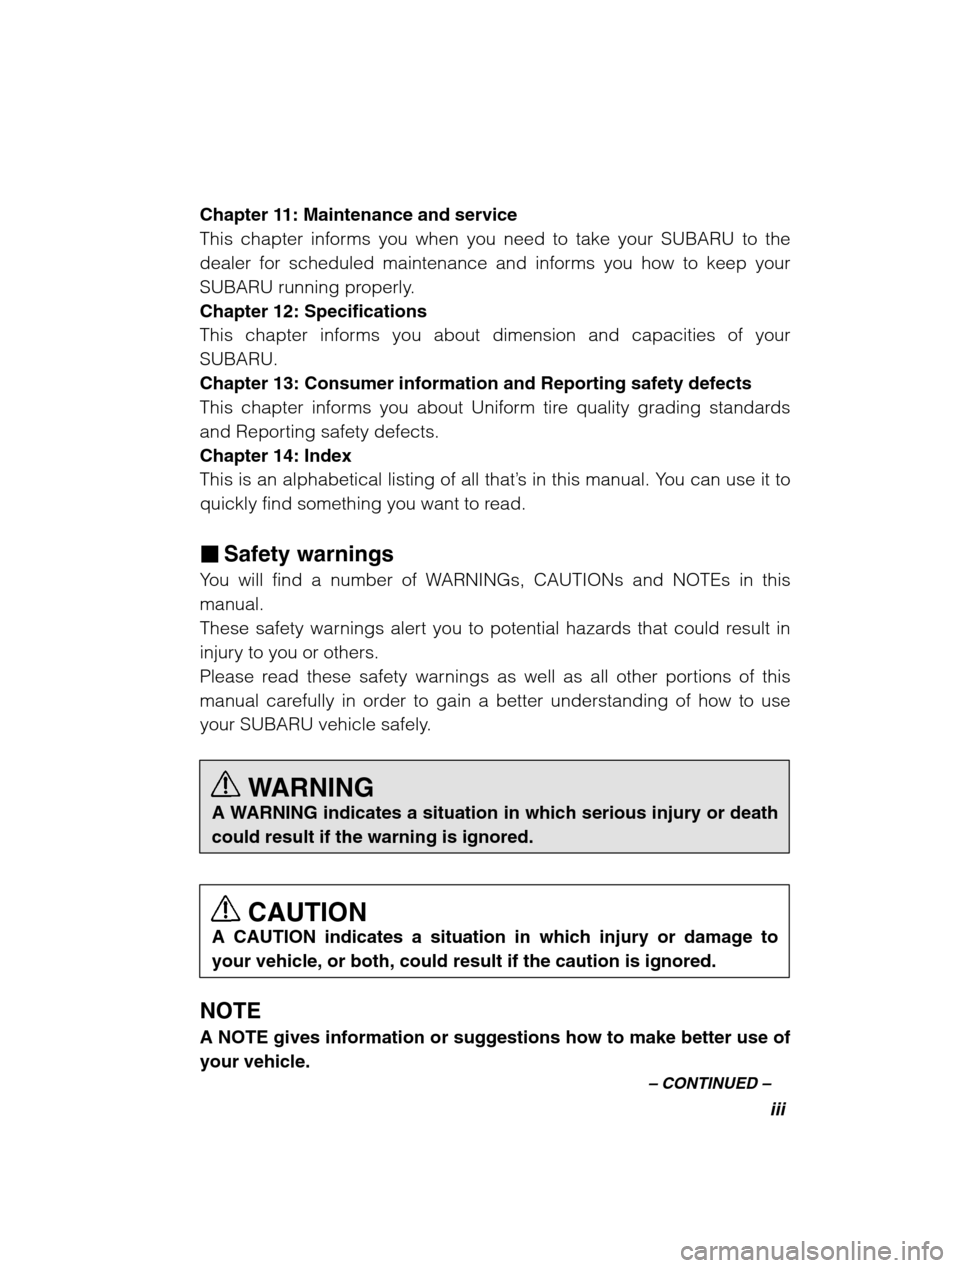 SUBARU LEGACY 2002 3.G Owners Manual iii
–
 CONTINUED  –
Chapter 11: Maintenance and service 
This chapter informs you when you need to take your SUBARU to the
dealer for scheduled maintenance and informs you how to keep your
SUBARU 